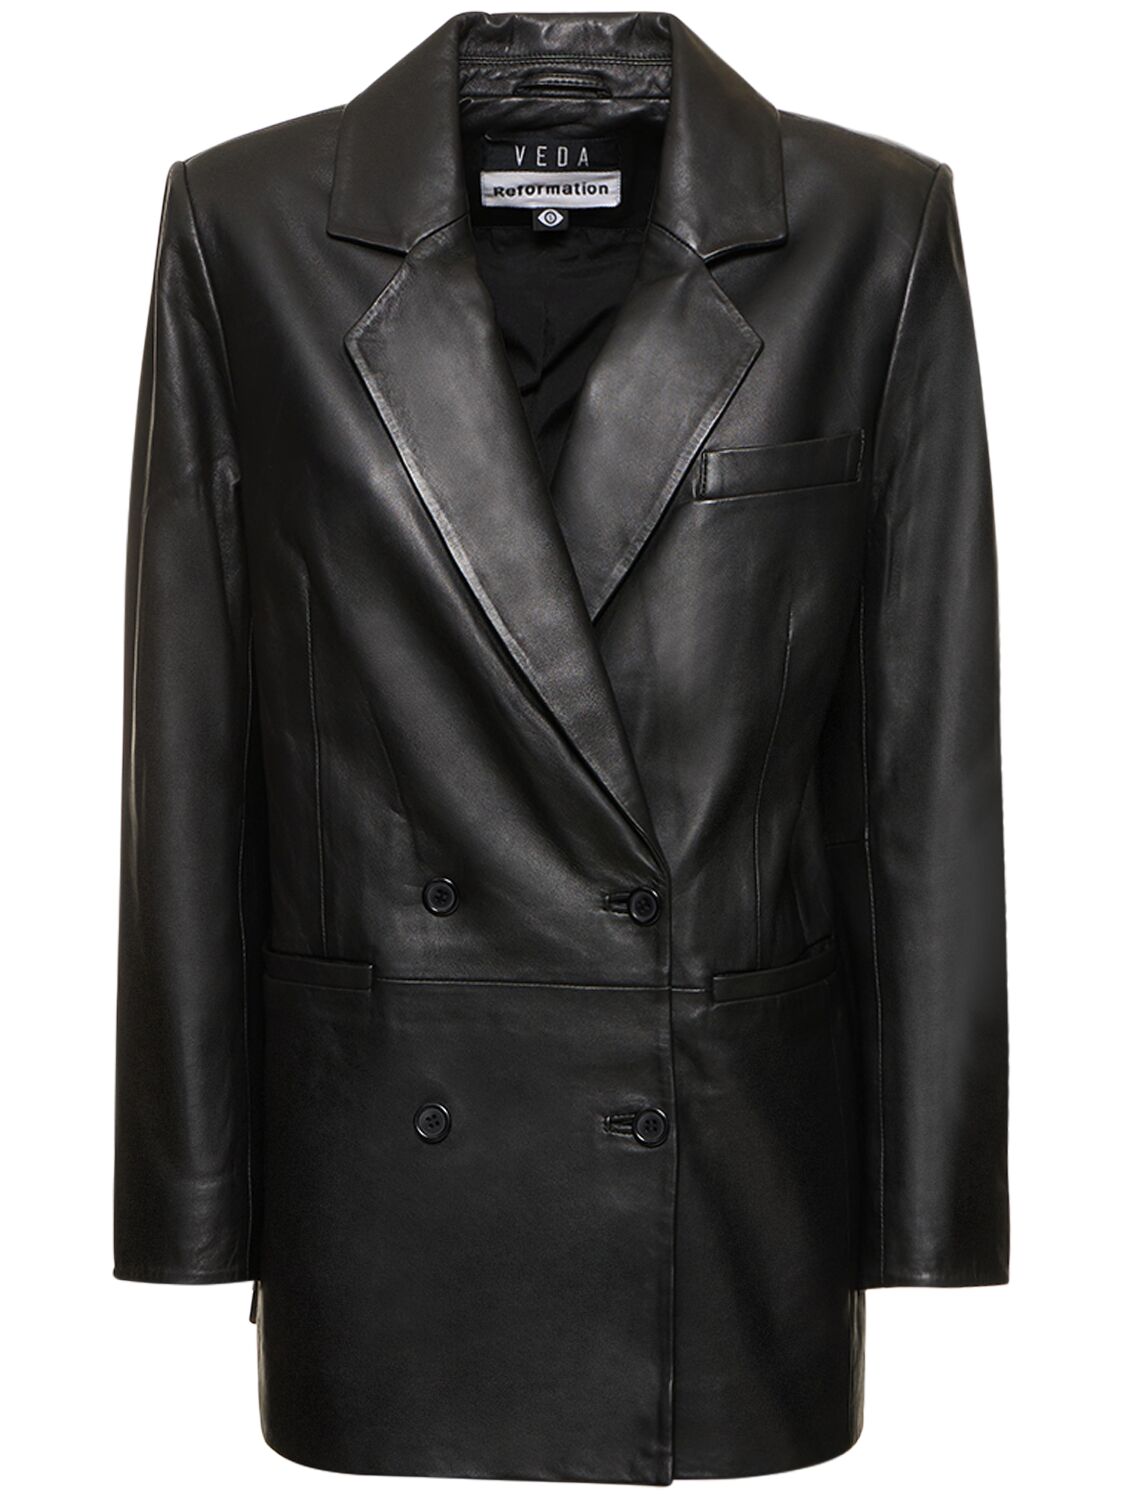 Reformation Veda Dalia Relaxed Leather Blazer In Black